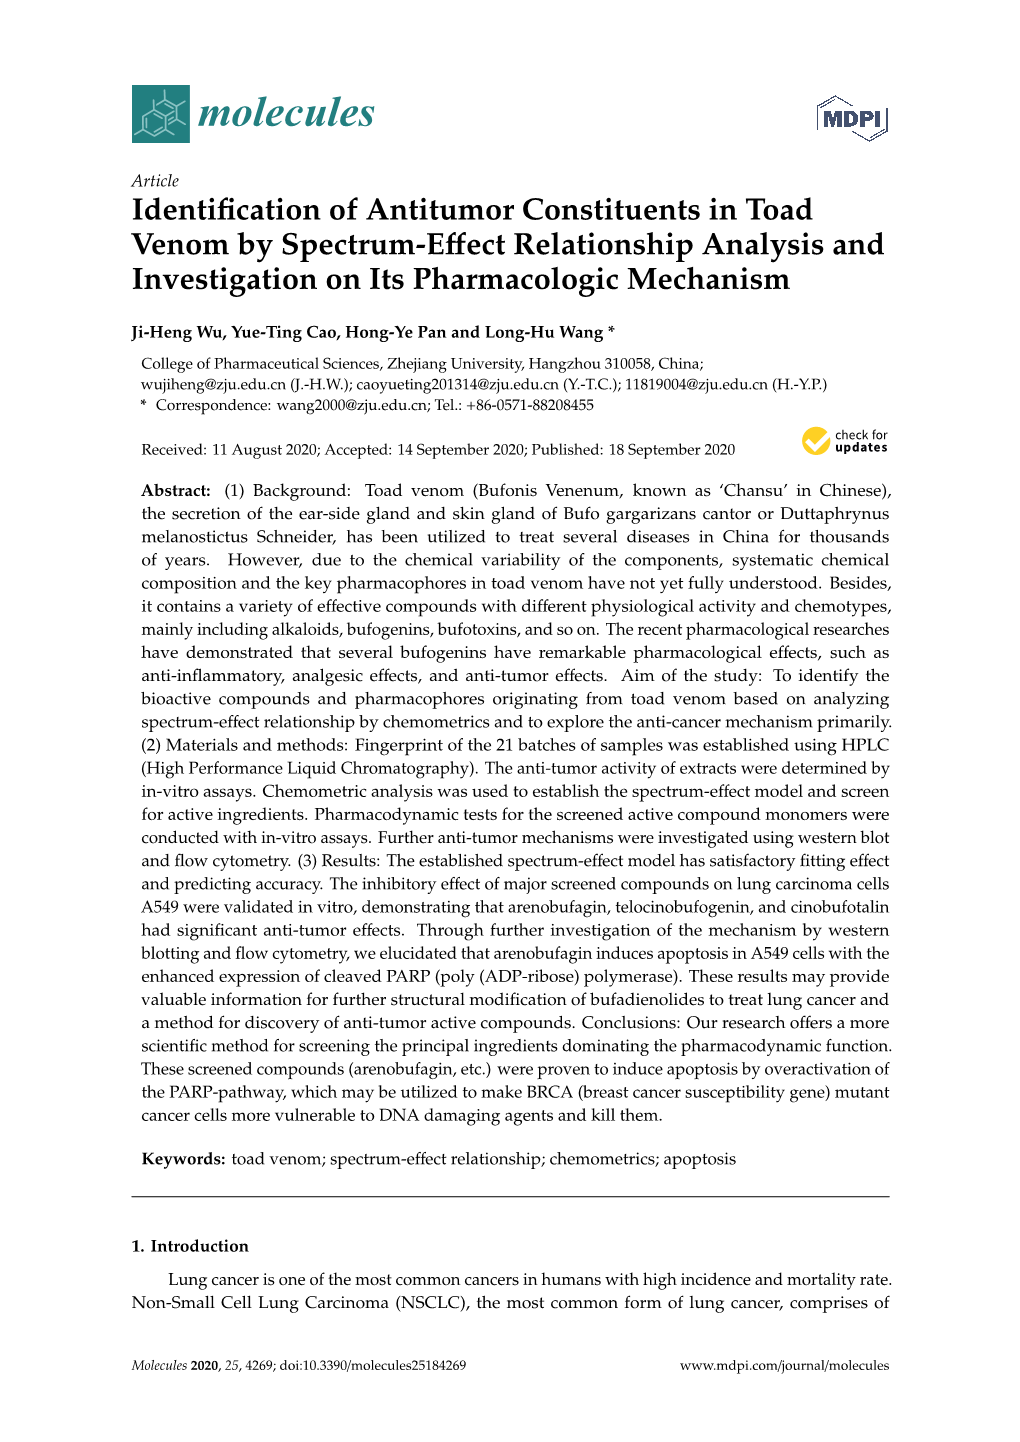 Identification of Antitumor Constituents in Toad Venom by Spectrum-Effect Relationship Analysis and Investigation on Its Pharmac